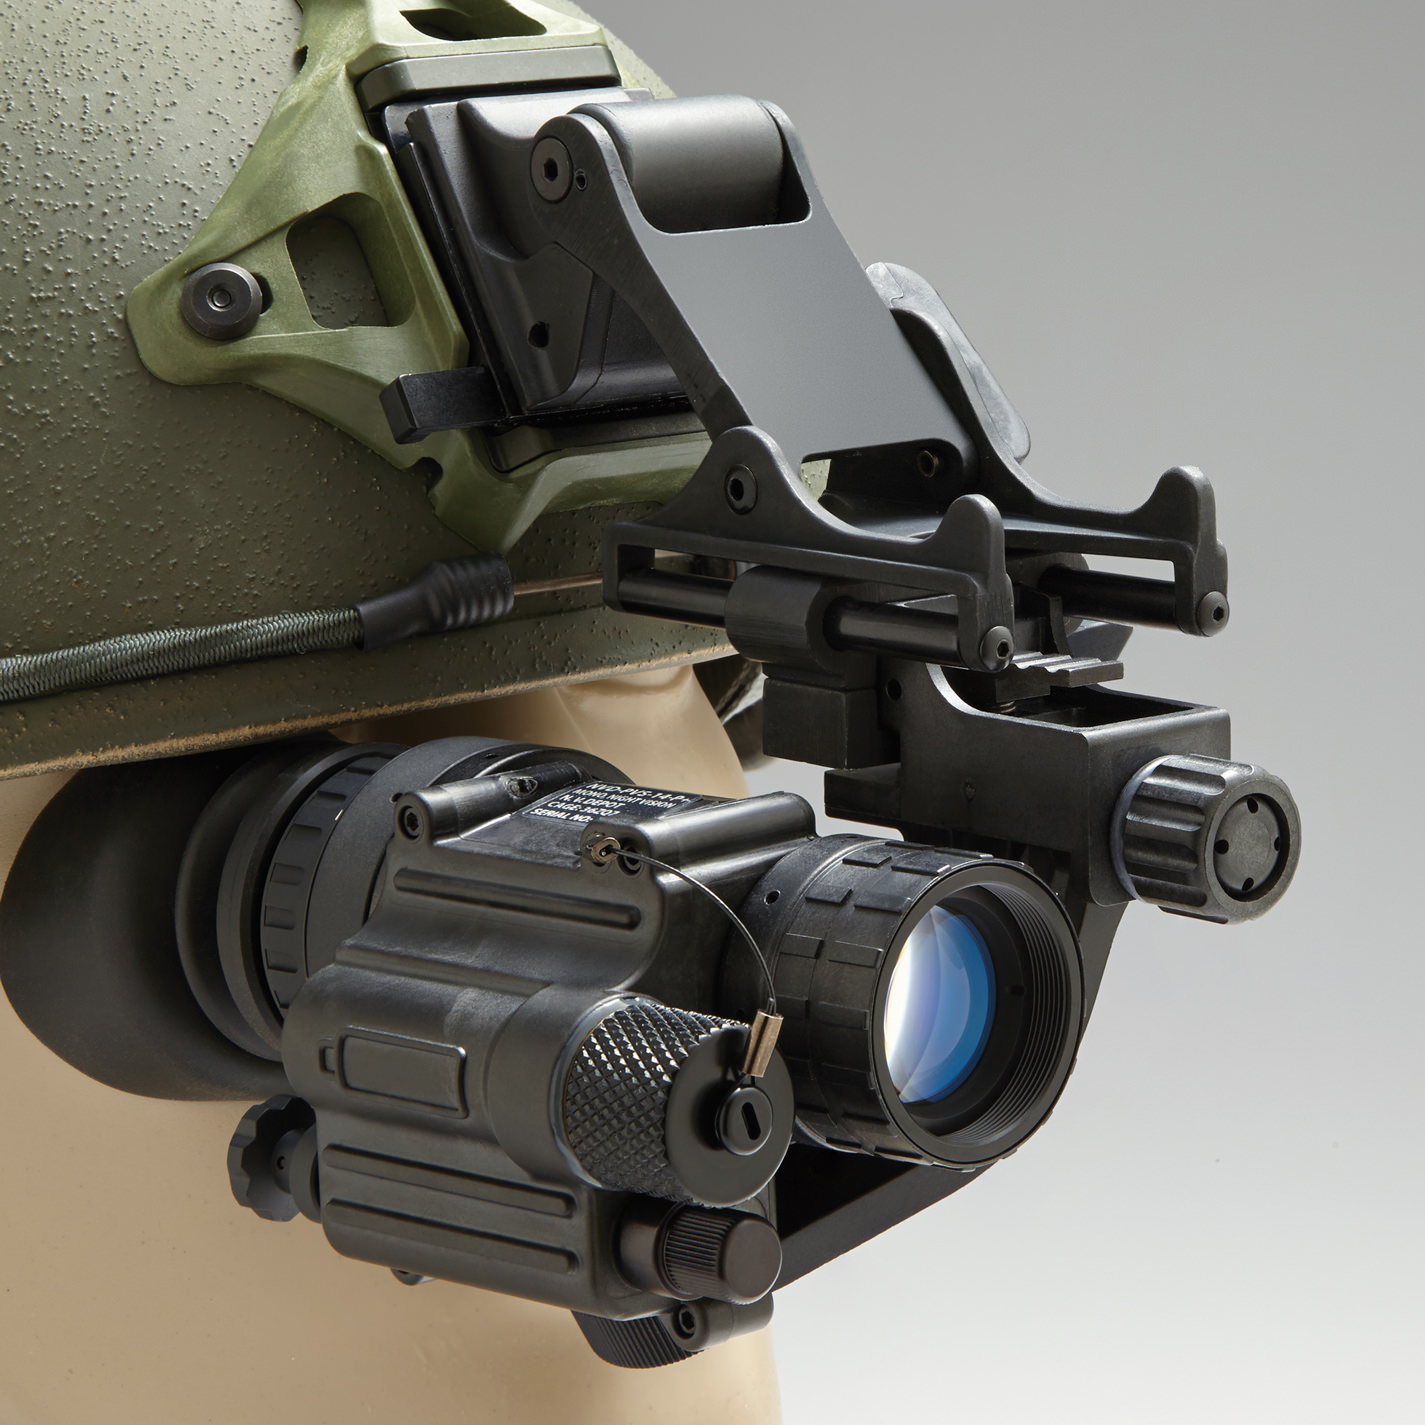 Details about   Night Vision New PVS-14 Style Digital Tactical Night Vision Telescope  HS27-0008 